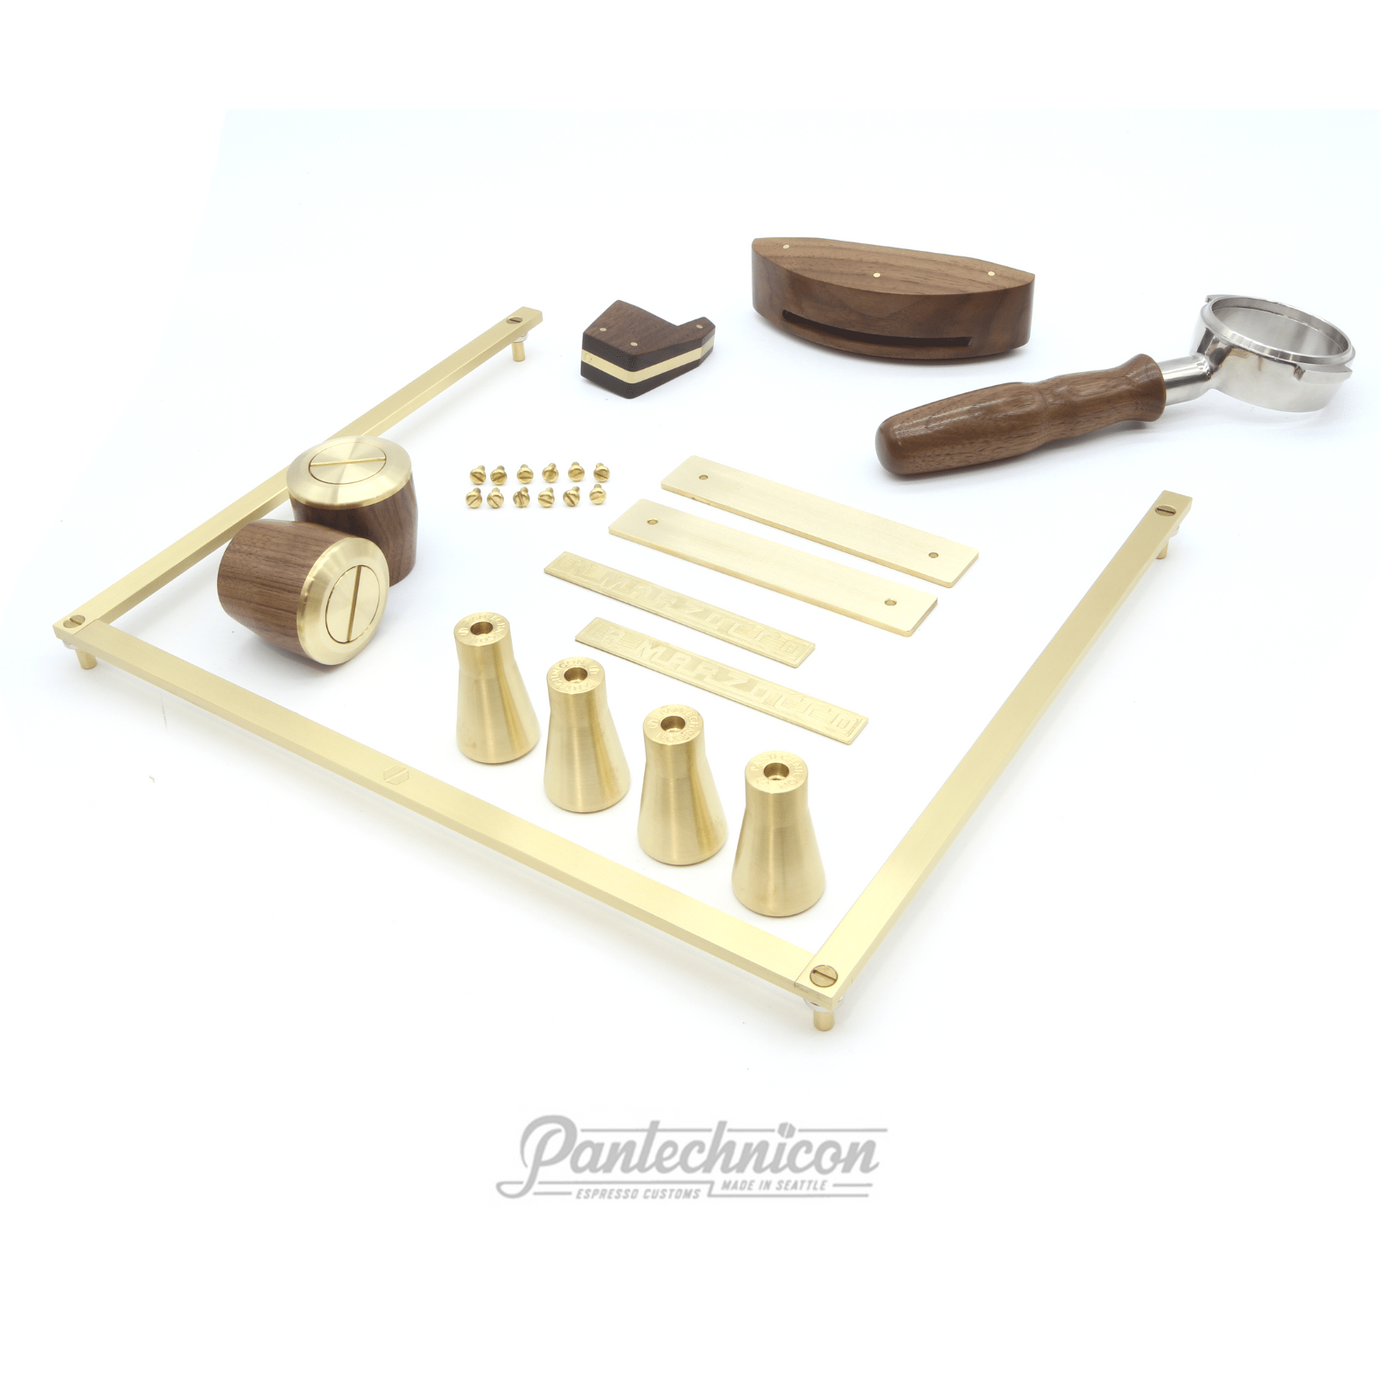 complete kit for linea mini in brass and walnut, tall legs, bottomless portafilter